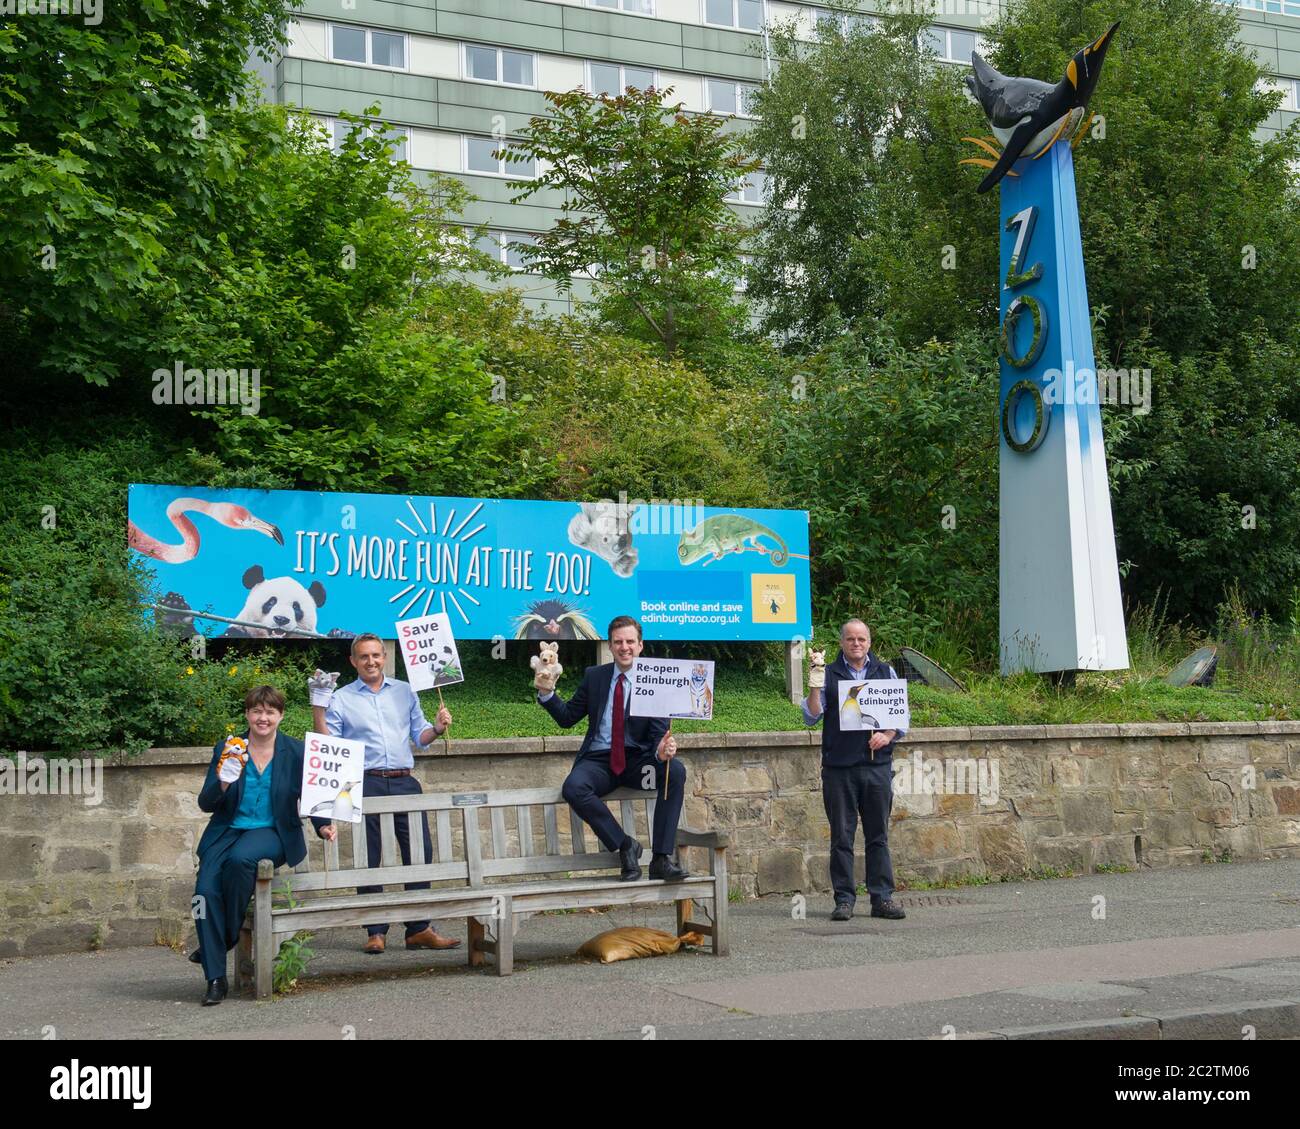 Edinburgh, Scotland, UK. , . Pictured: (left-right) Edinburgh MSPs: Ruth Davidson, Alex Cole-Hamilton, Daniel Johnson and Andy Wightman, seen campaigning on the steps of the zoo with posters and animal puppets for the safe re-opening of Edinburgh Zoo as part of phase 2 easing of lockdown restrictions. Credit: Colin Fisher/Alamy Live News Stock Photo